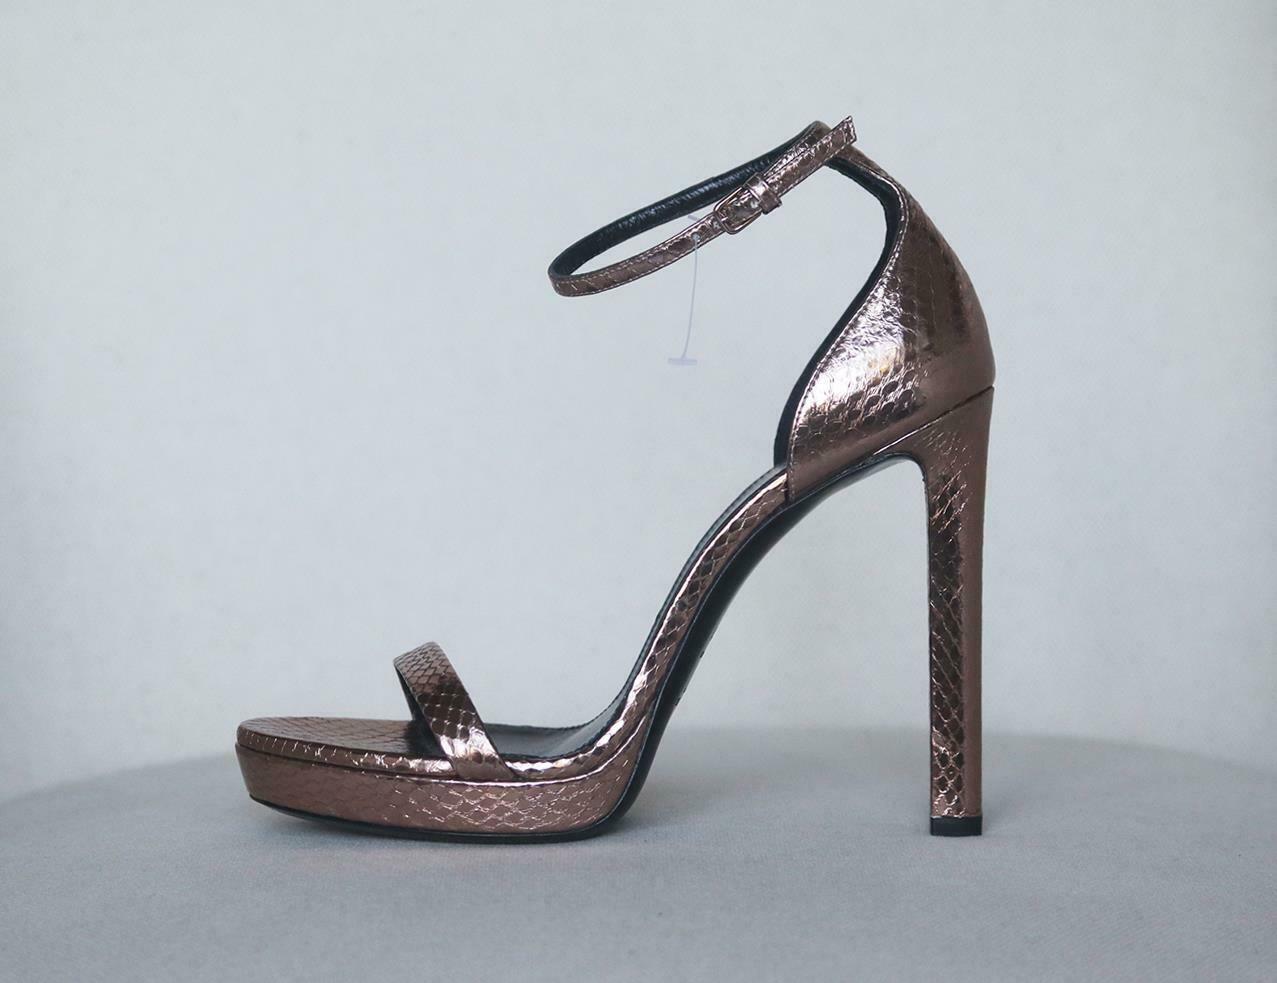 Saint Laurent's coveted 'Jane' sandals are updated this season in a bronze hue, they've been crafted in Italy from bronze snake-effect leather and have delicate ankle straps that buckles at the ankle. Heel measures approximately 110mm/ 4.5 inches